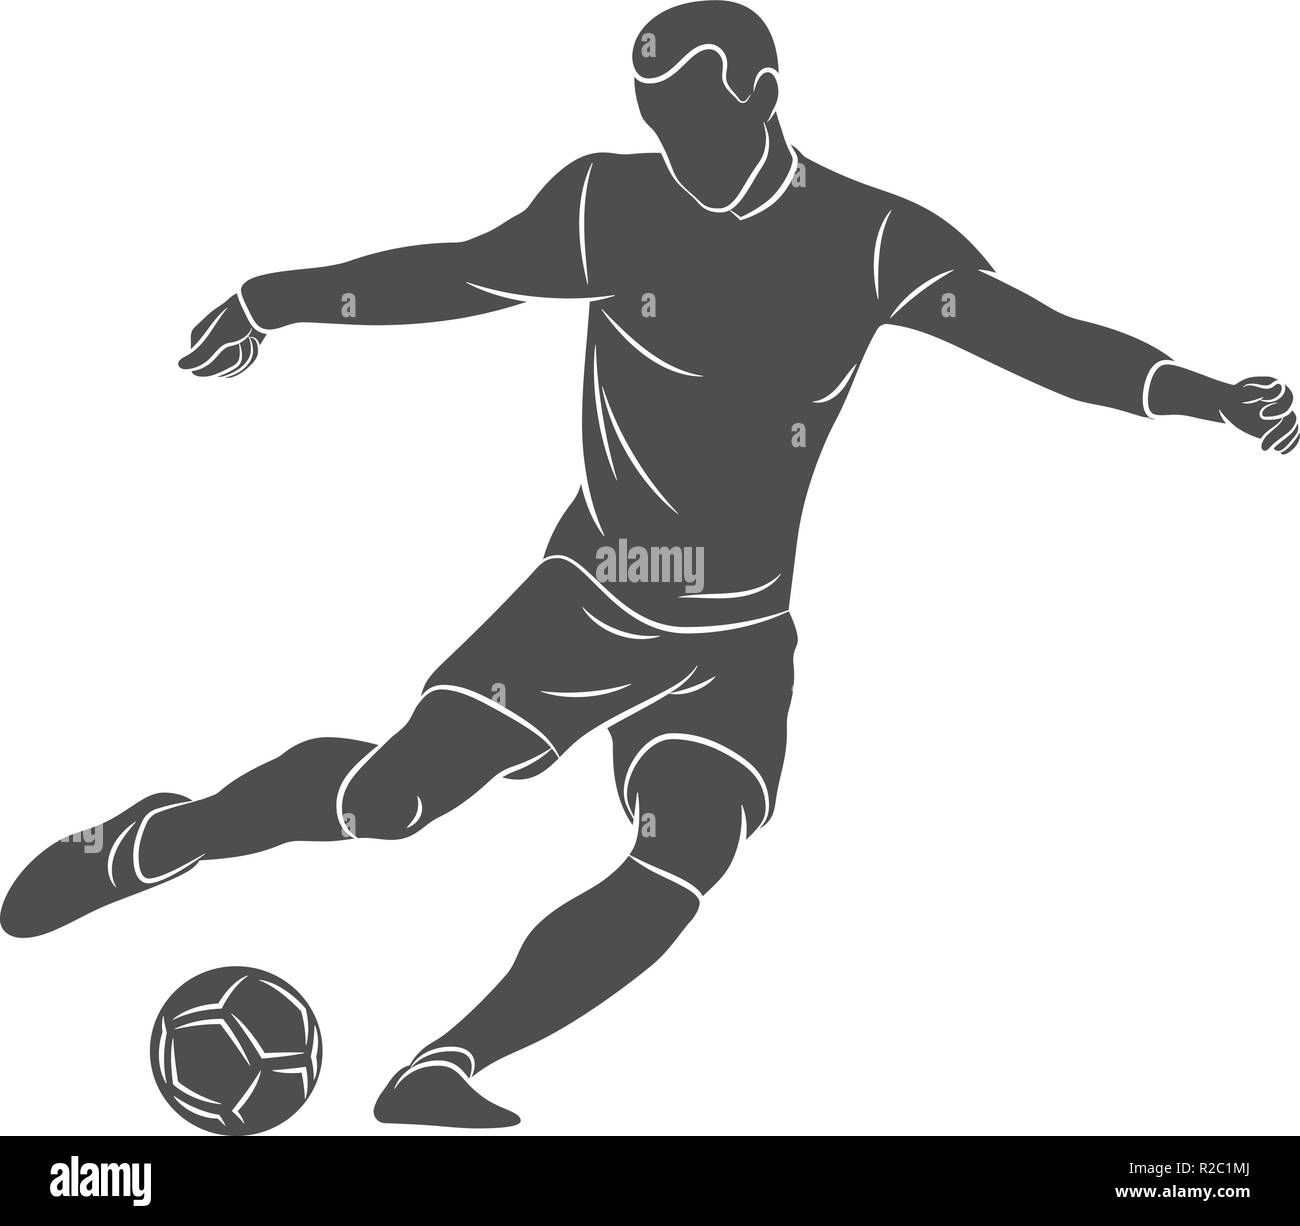 Silhouette soccer player quick shooting a ball on a white background Stock Vector